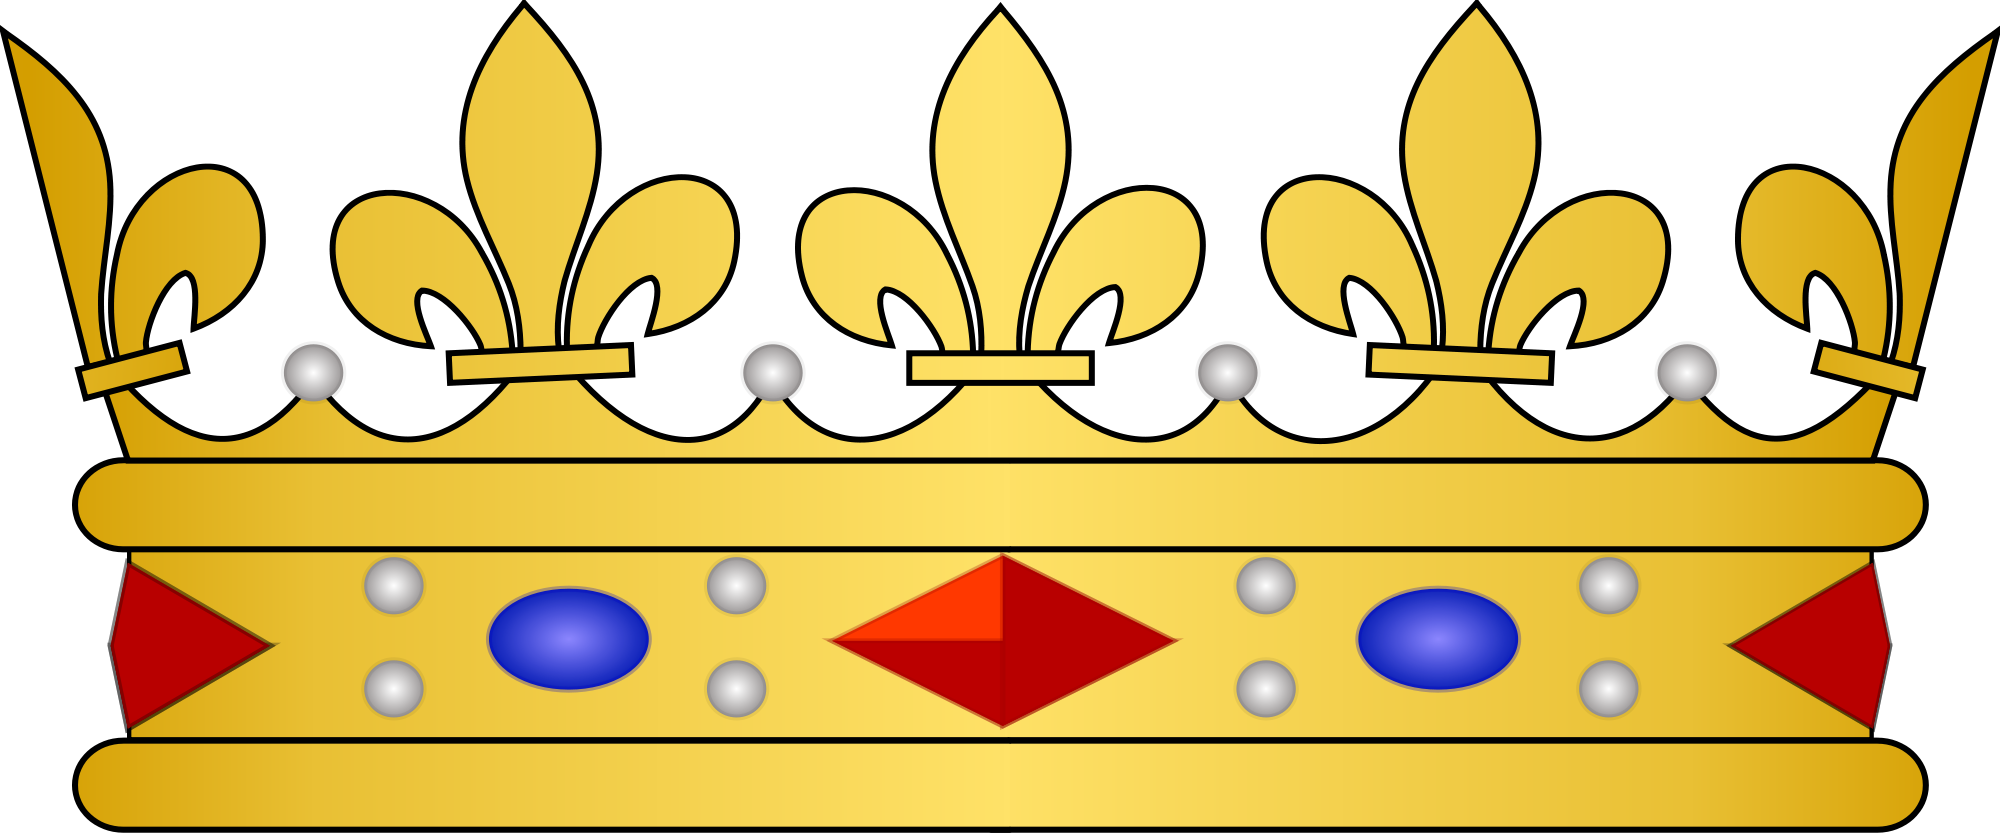 Golden Prince Crown Free PNG Image